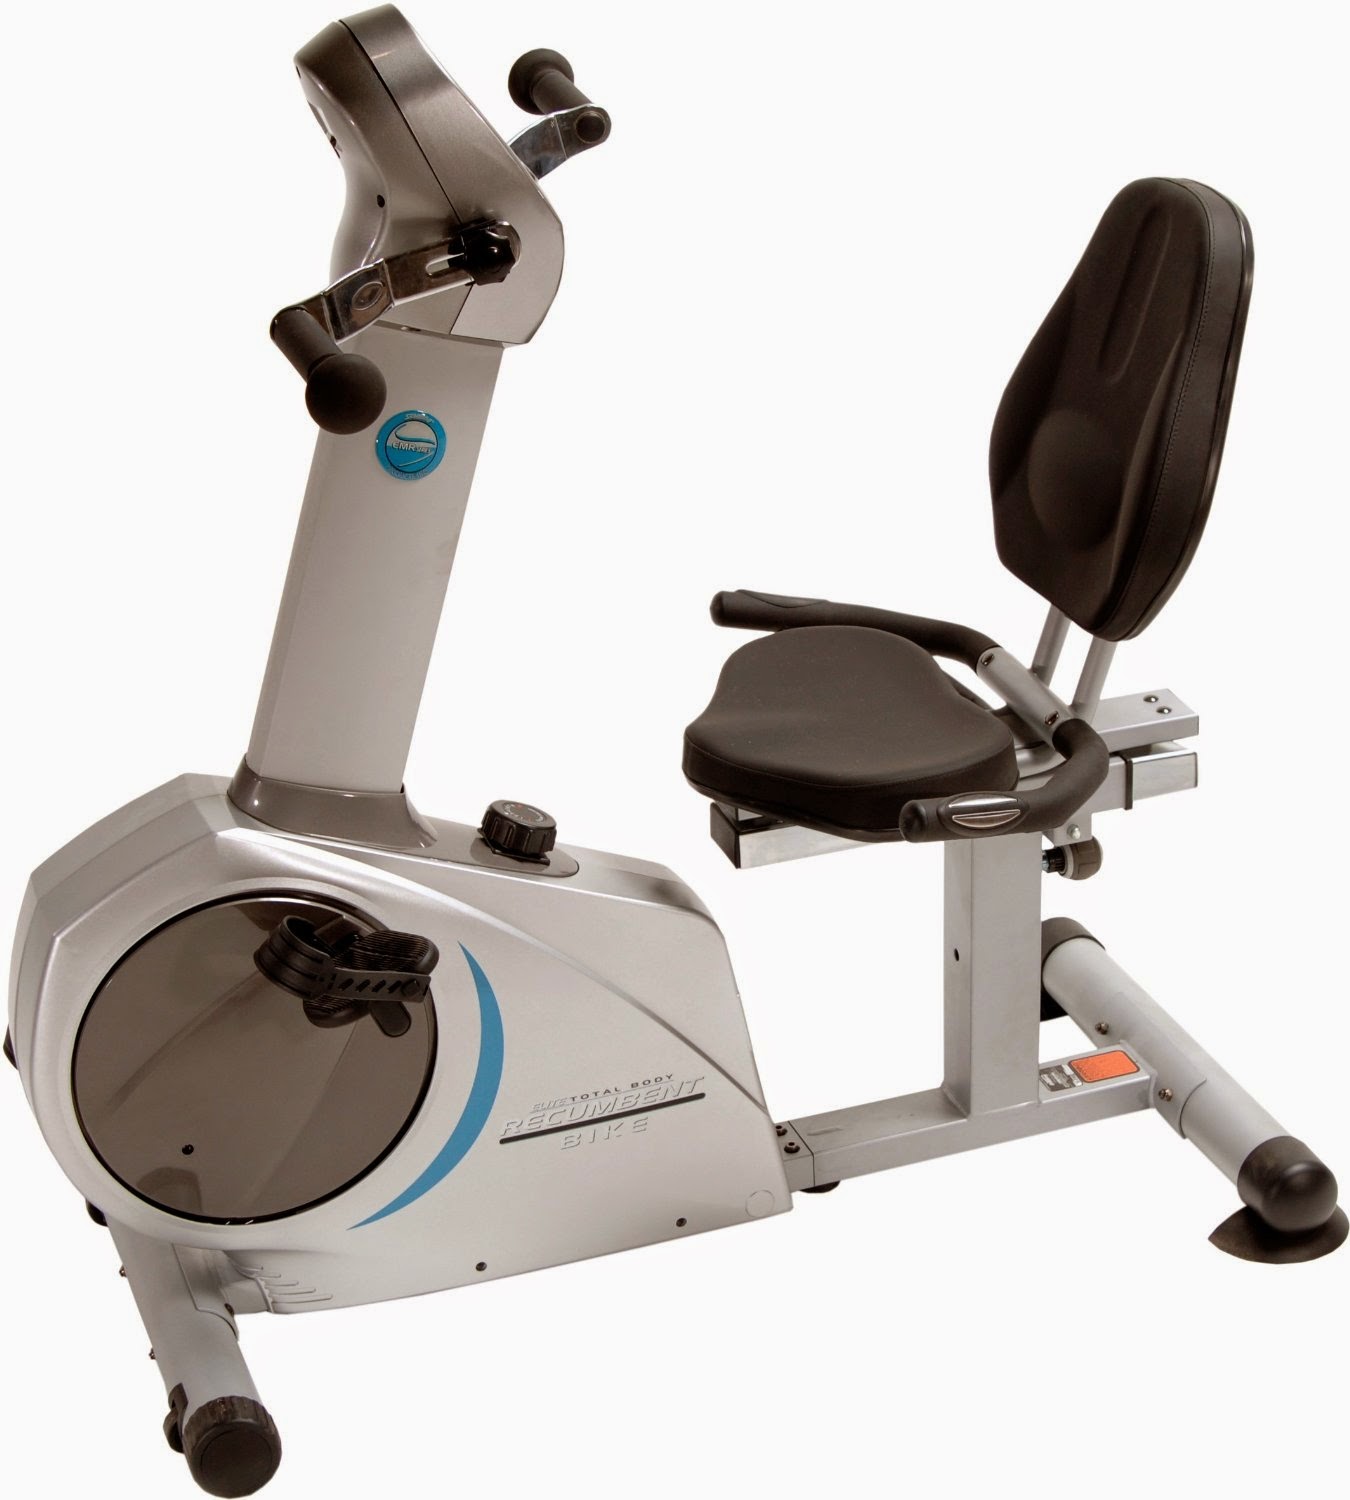 Simple Exercise bike with arm workout for Women